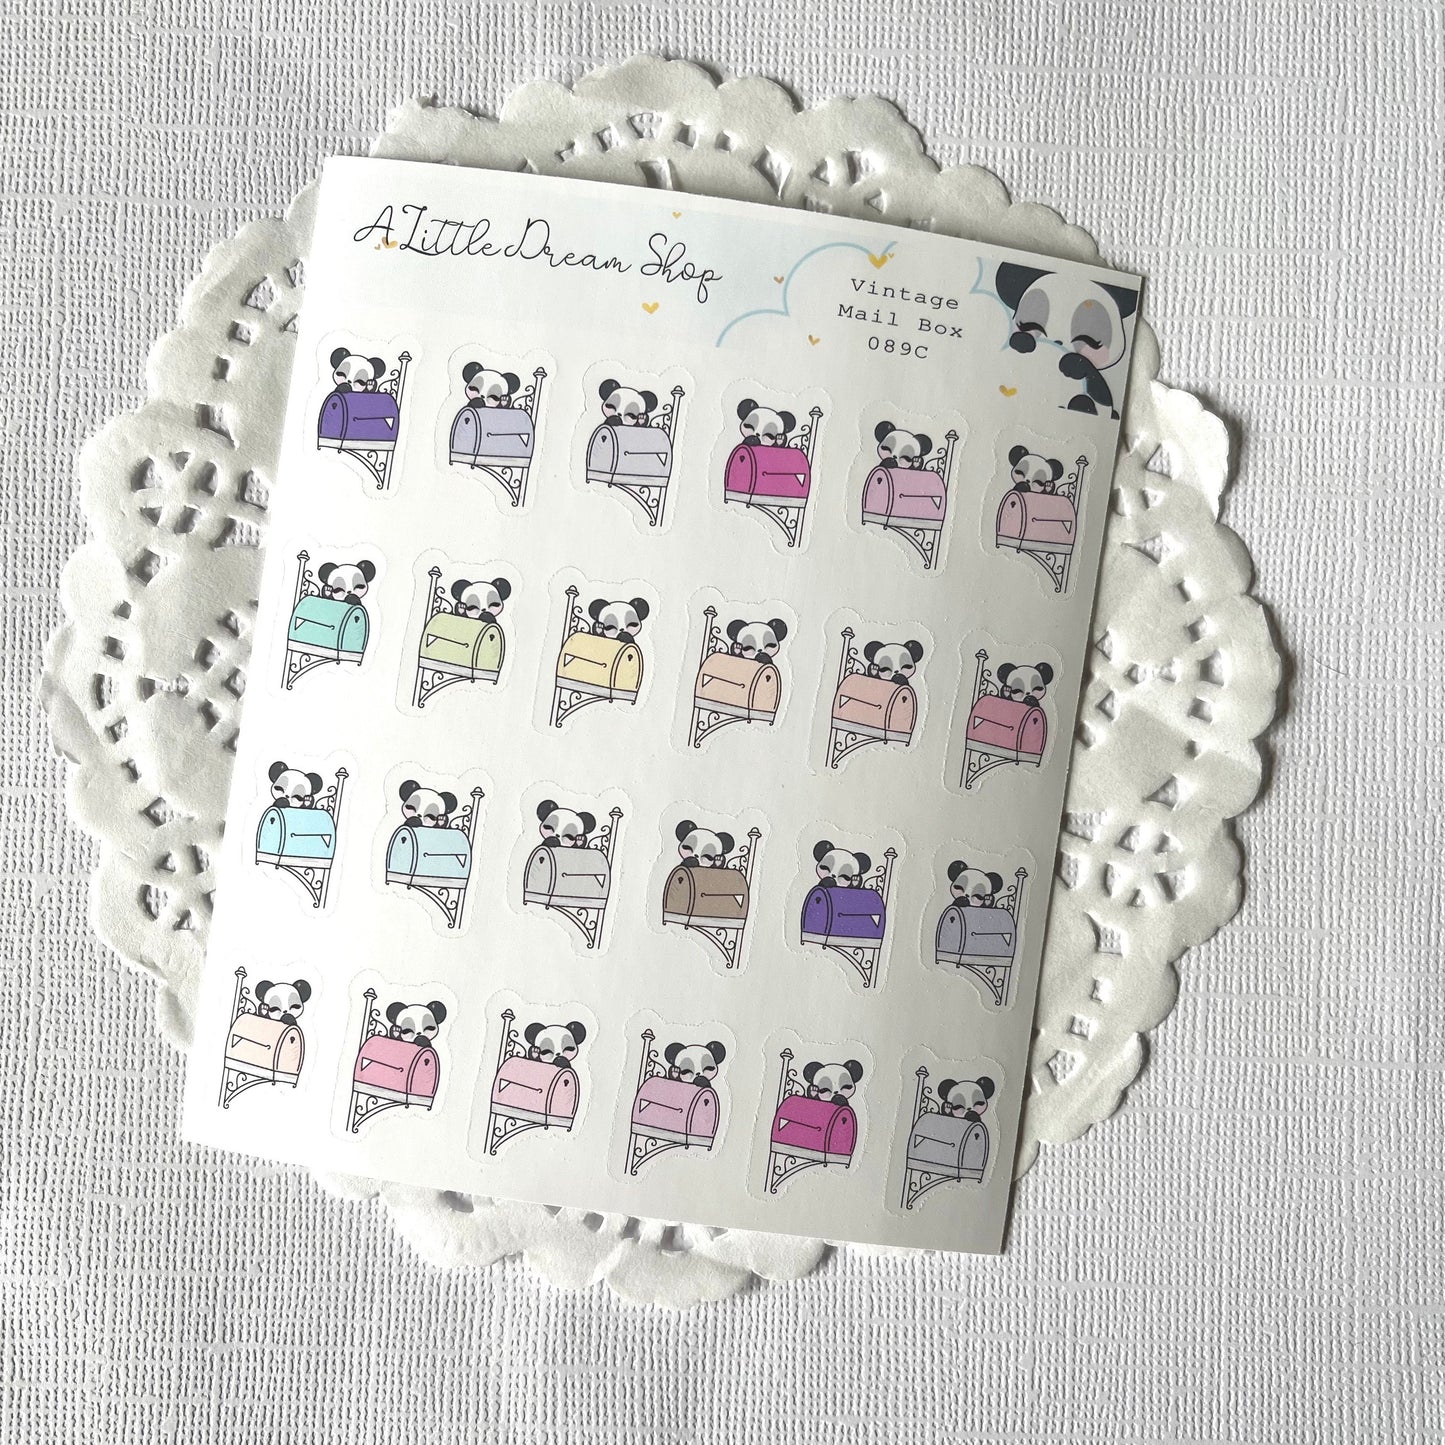 Vintage Mail Box - Character Stickers Sheet